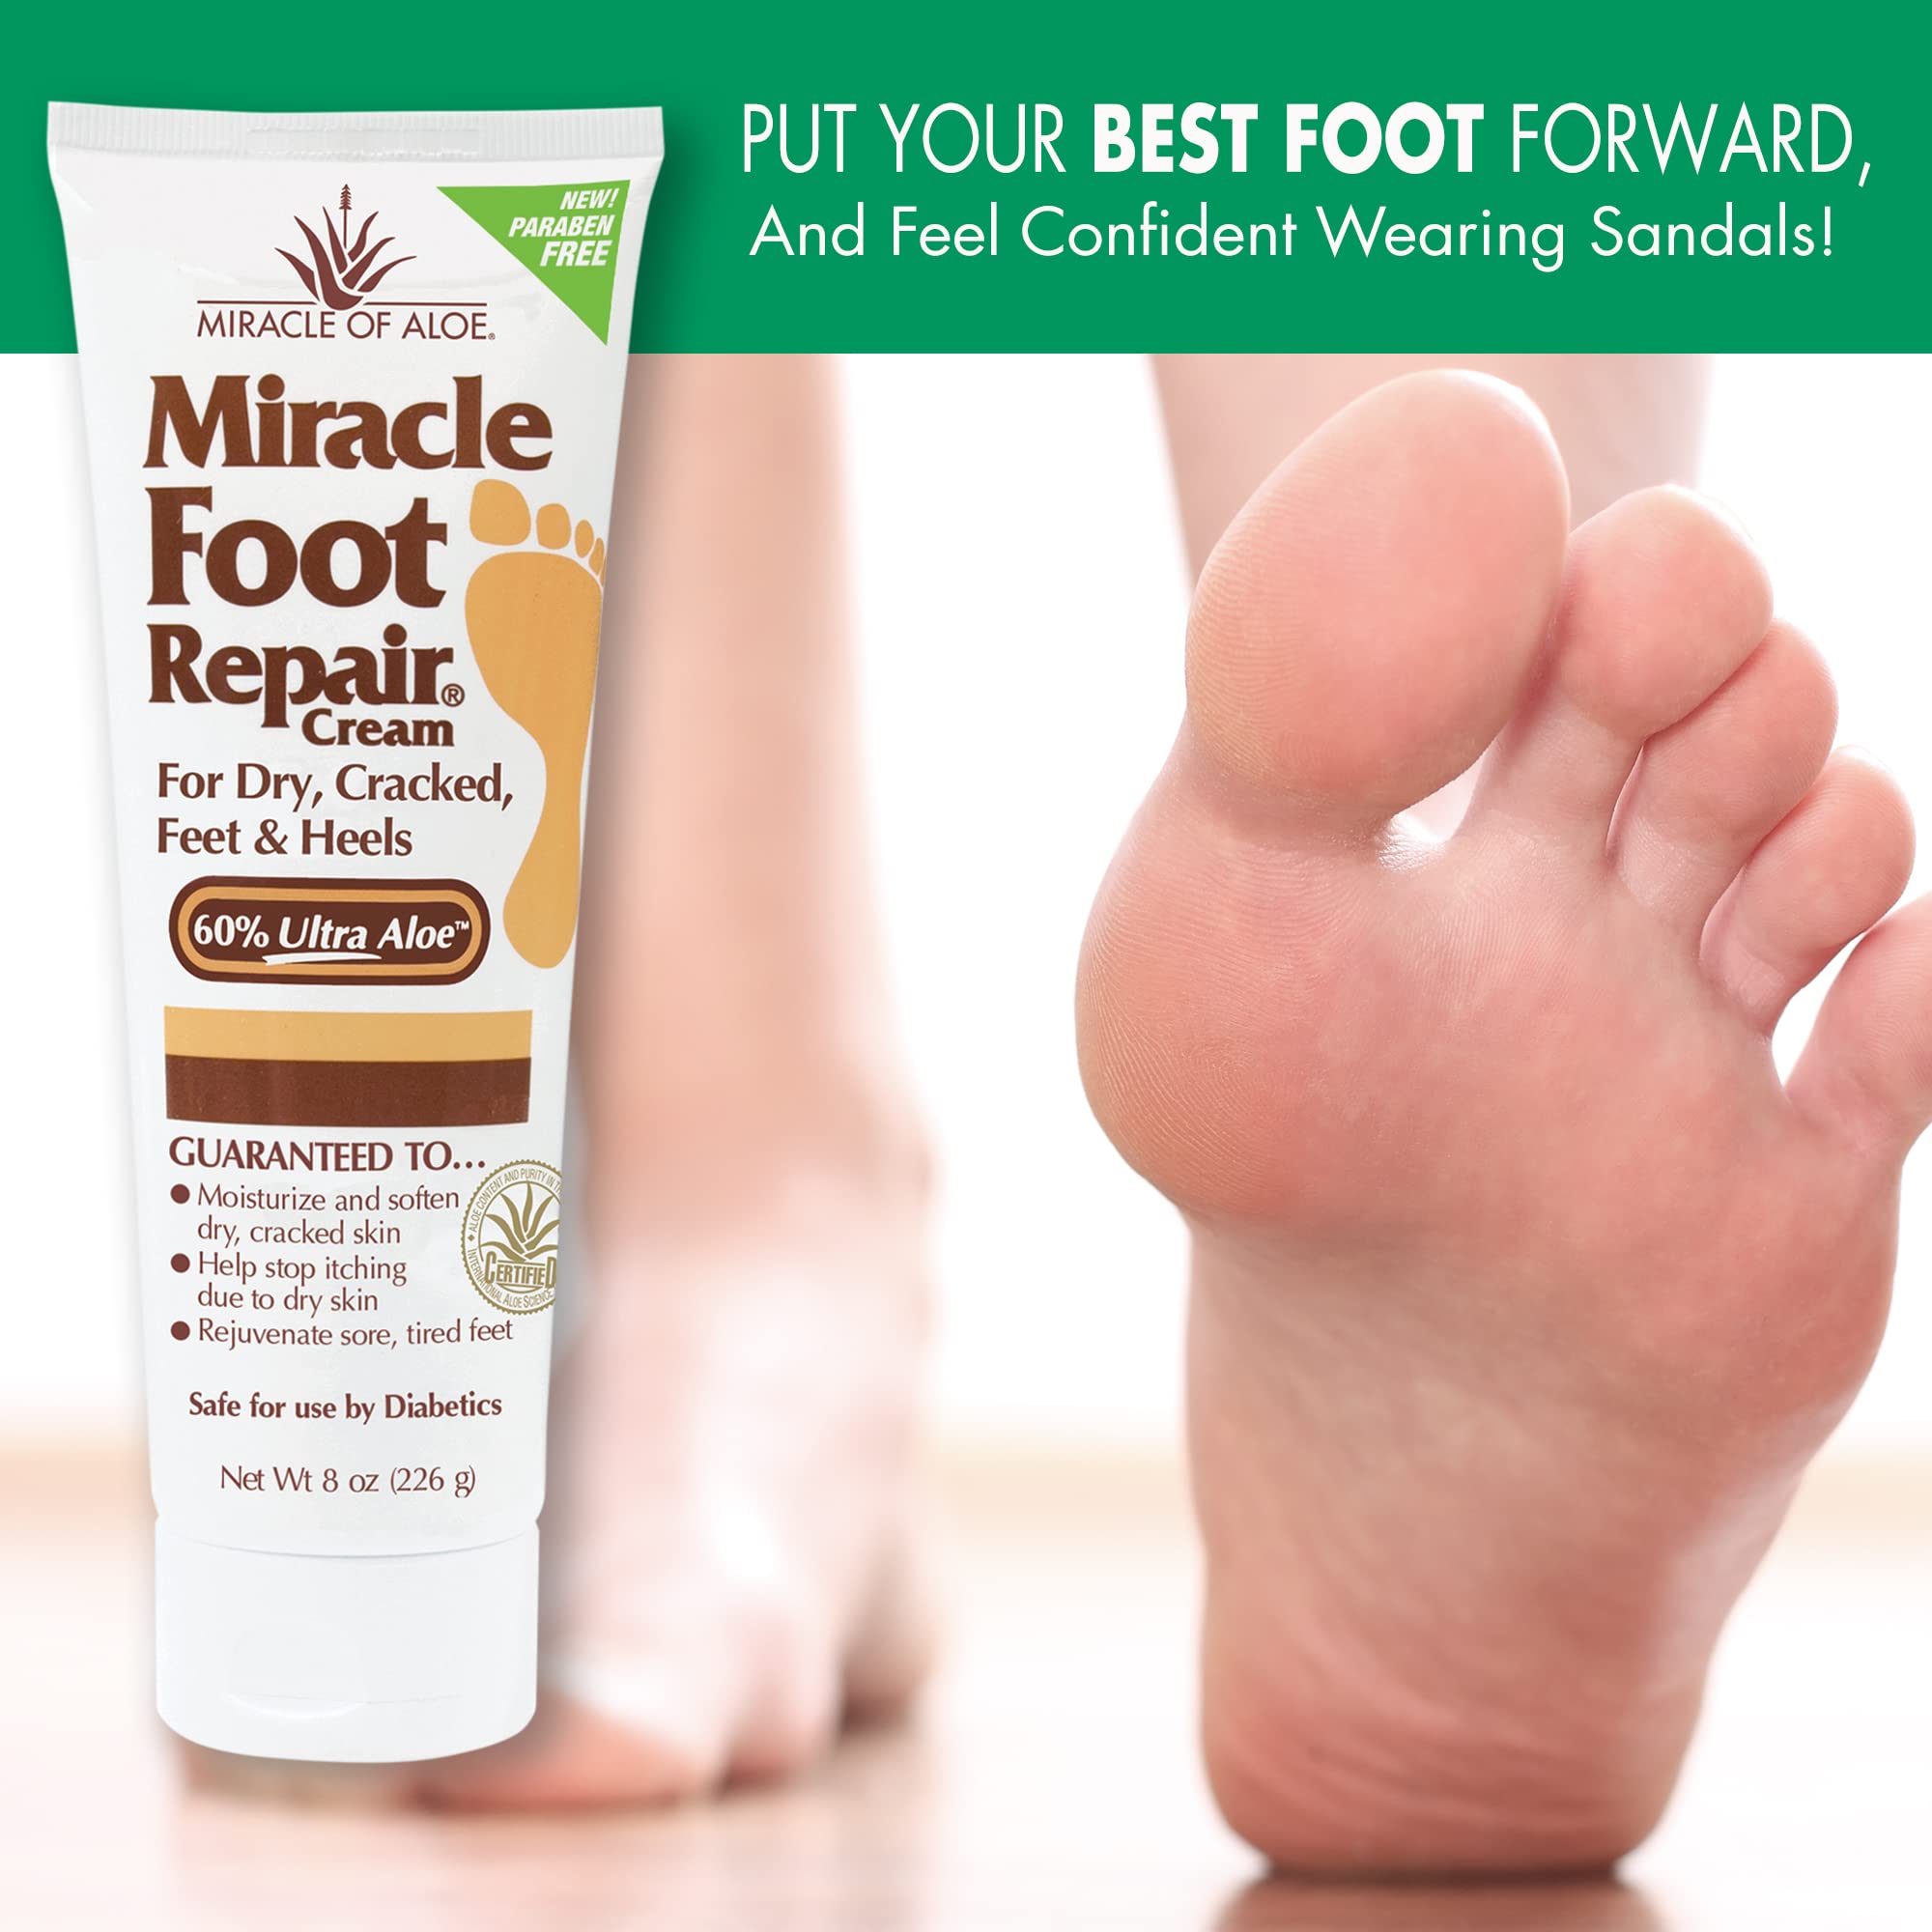 Miracle Foot Repair Cream, 8 oz Repairs Dry Cracked Heels and Feet, Diabetic-Safe, 60% Pure Ultra Aloe Moisturizes, Softens, and Repairs, Relief for Athlete's Foot and Ingrown Toenails